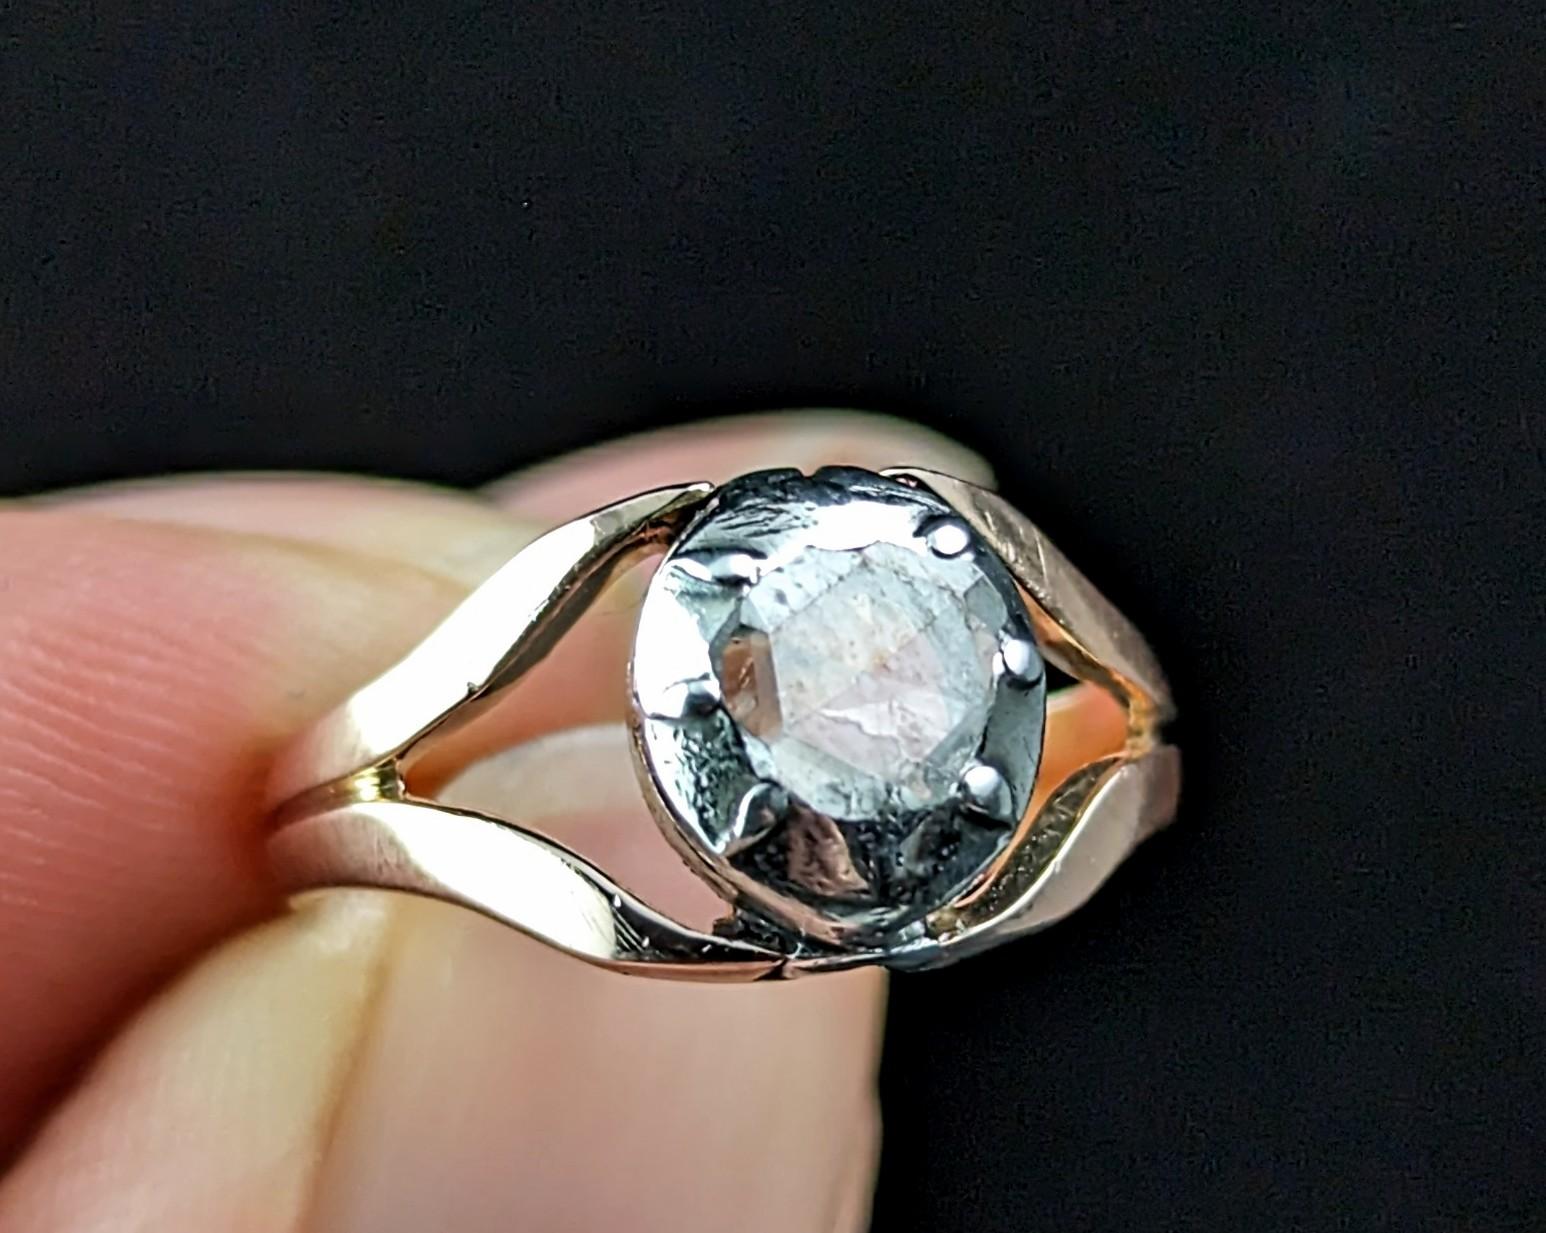 You cannot help but be enchanted by this superb antique rose cut diamond conversion ring.

A beautiful late Georgian era rose cut diamond bezel set into sterling silver and added to a later 9ct rose gold bifurcated band.

The romantic twinkling rose